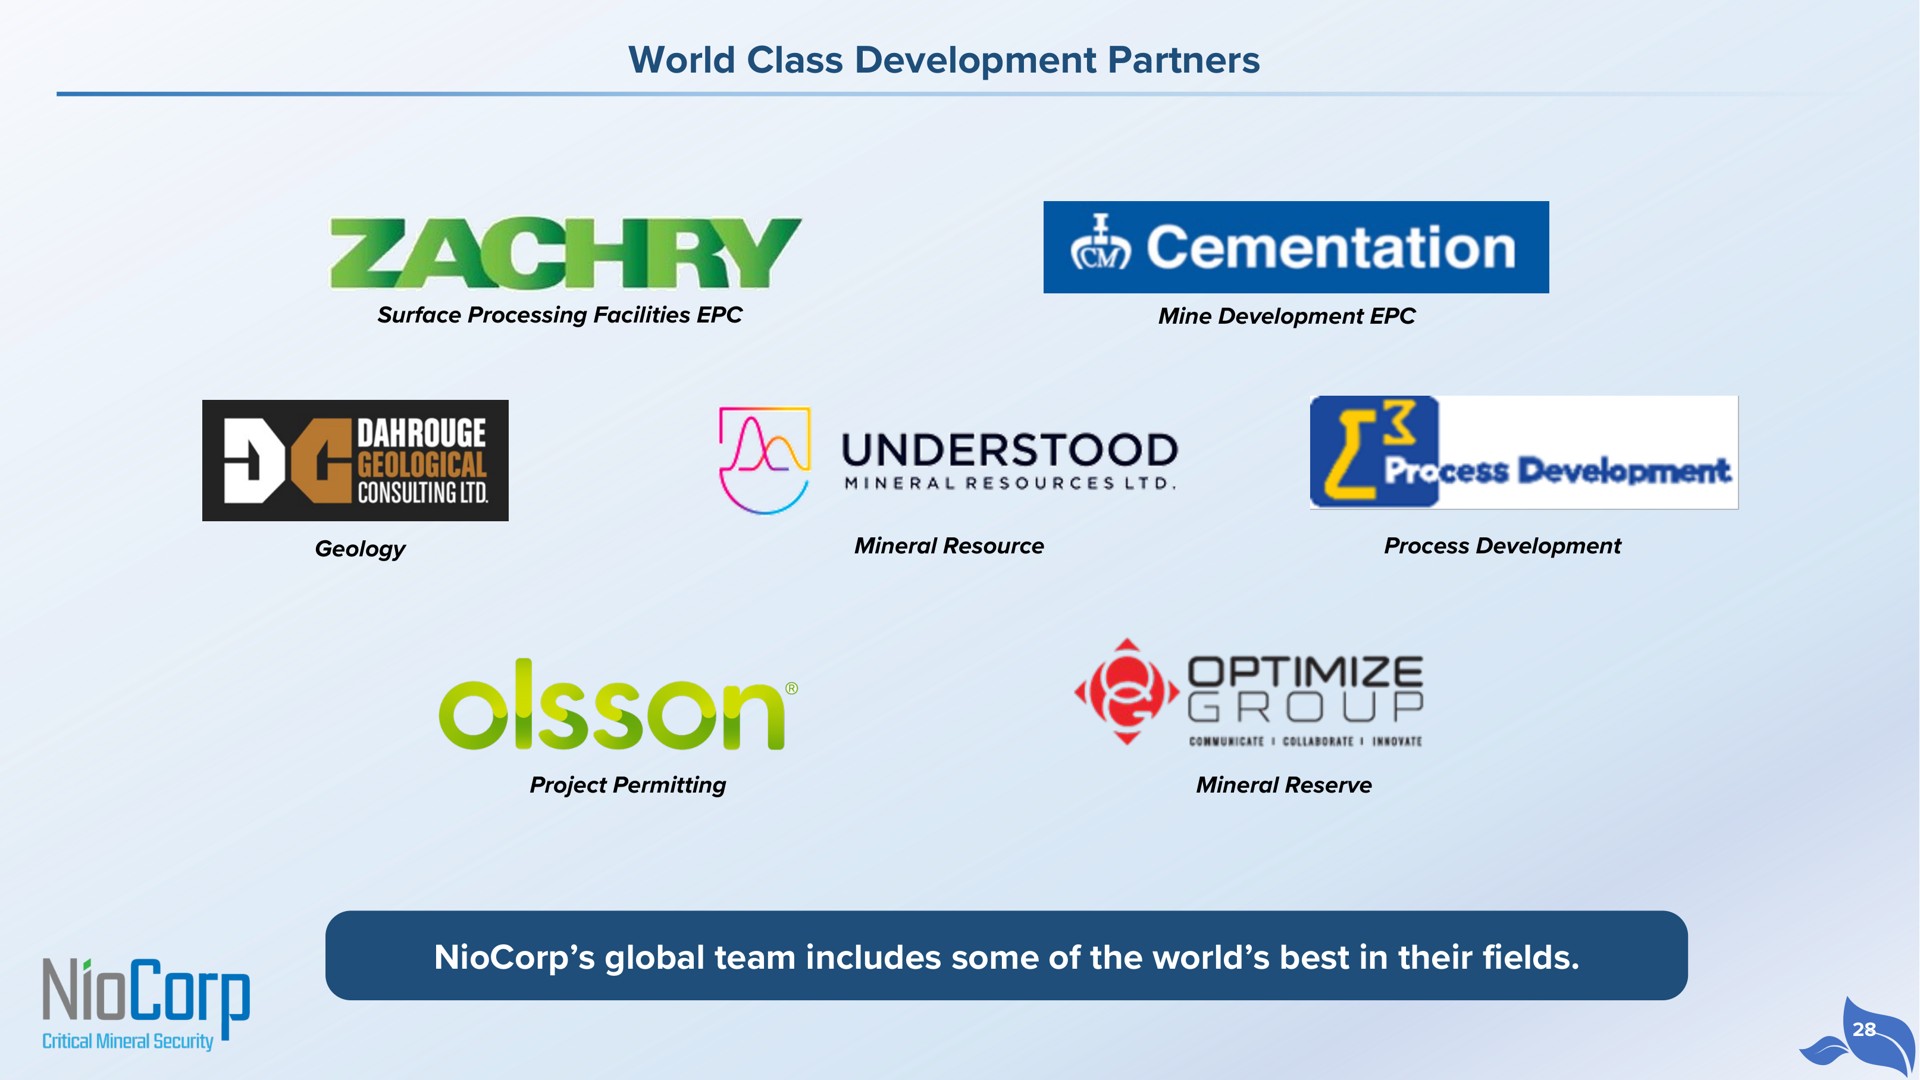 world class development partners global team includes some of the world best in their fields cementation understood | NioCorp